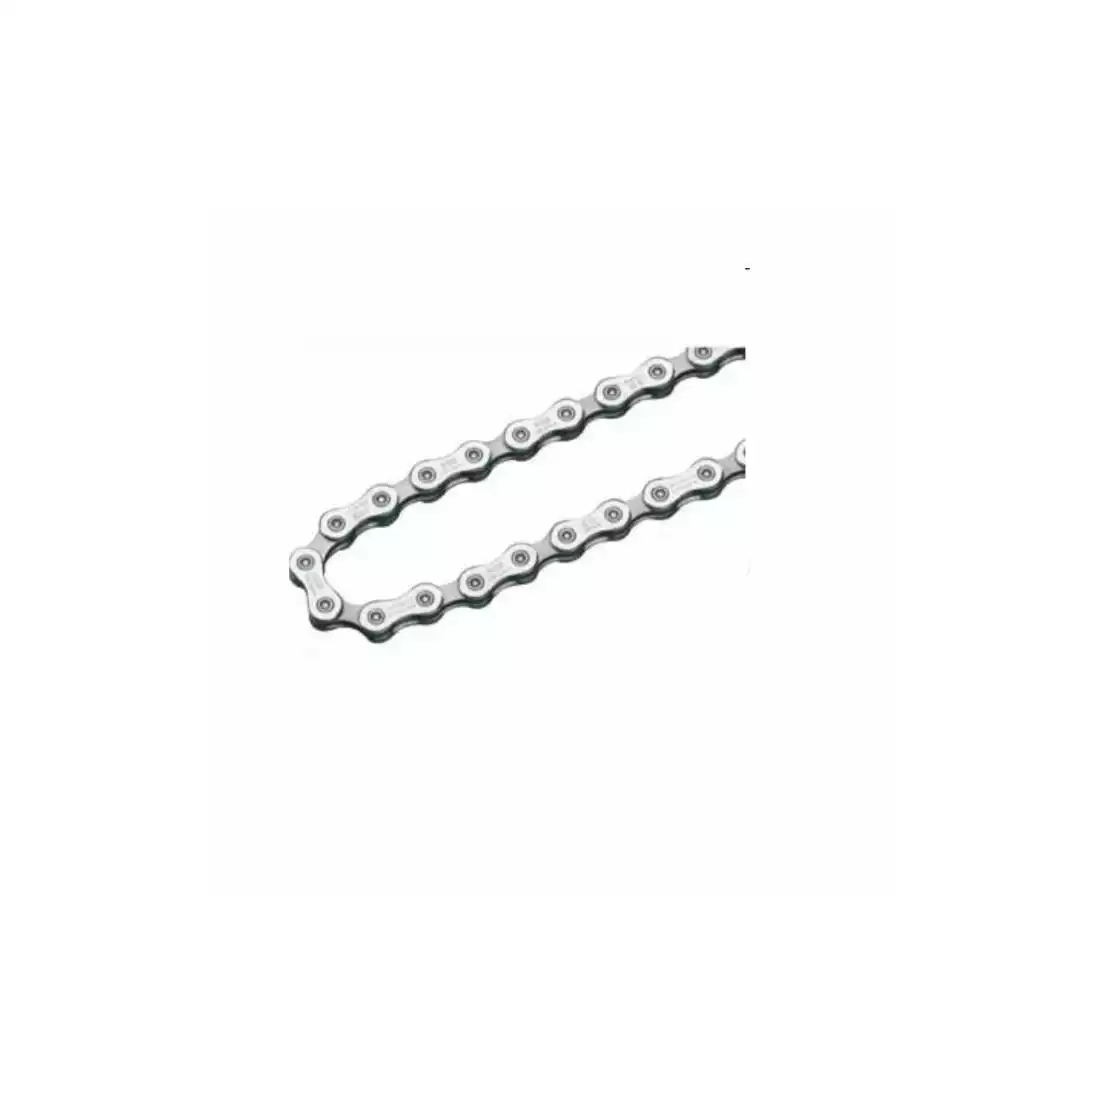 SHIMANO CN-6600 Bicycle chain 10-speed, 114 links, silver